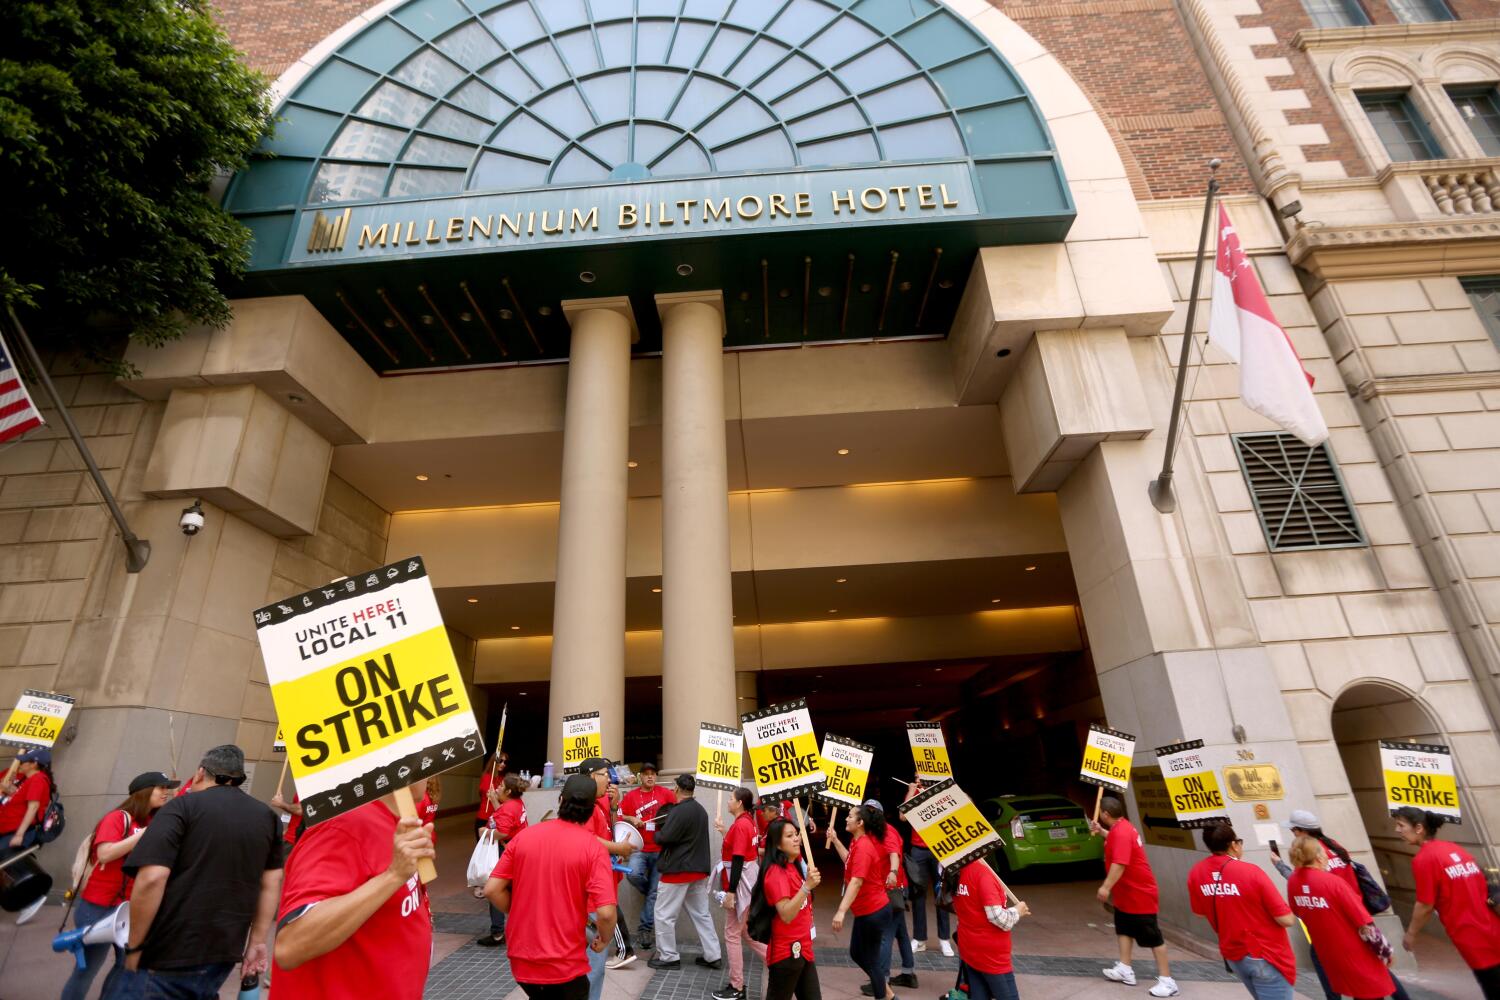 After three months of rolling strikes, second L.A. hotel reaches tentative agreement with union